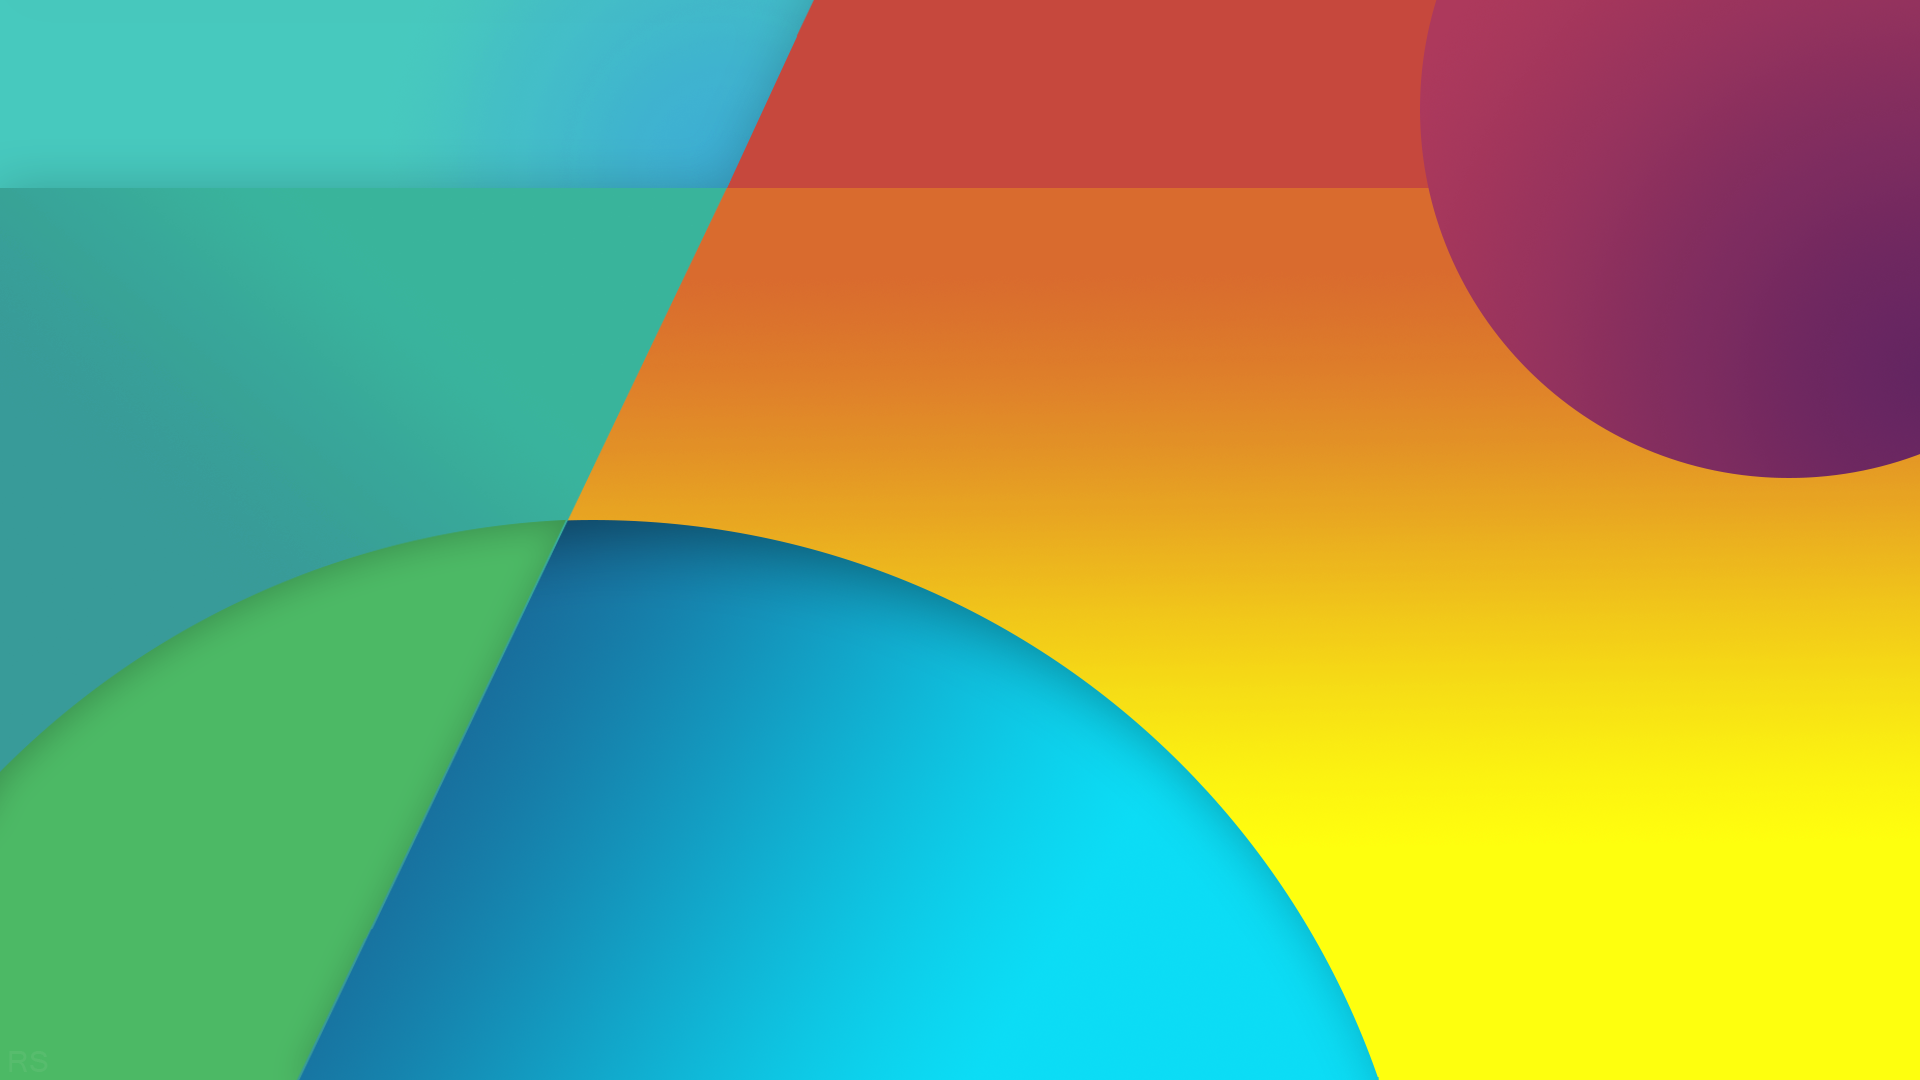 hd wallpapers for nexus 5,blue,green,orange,yellow,colorfulness